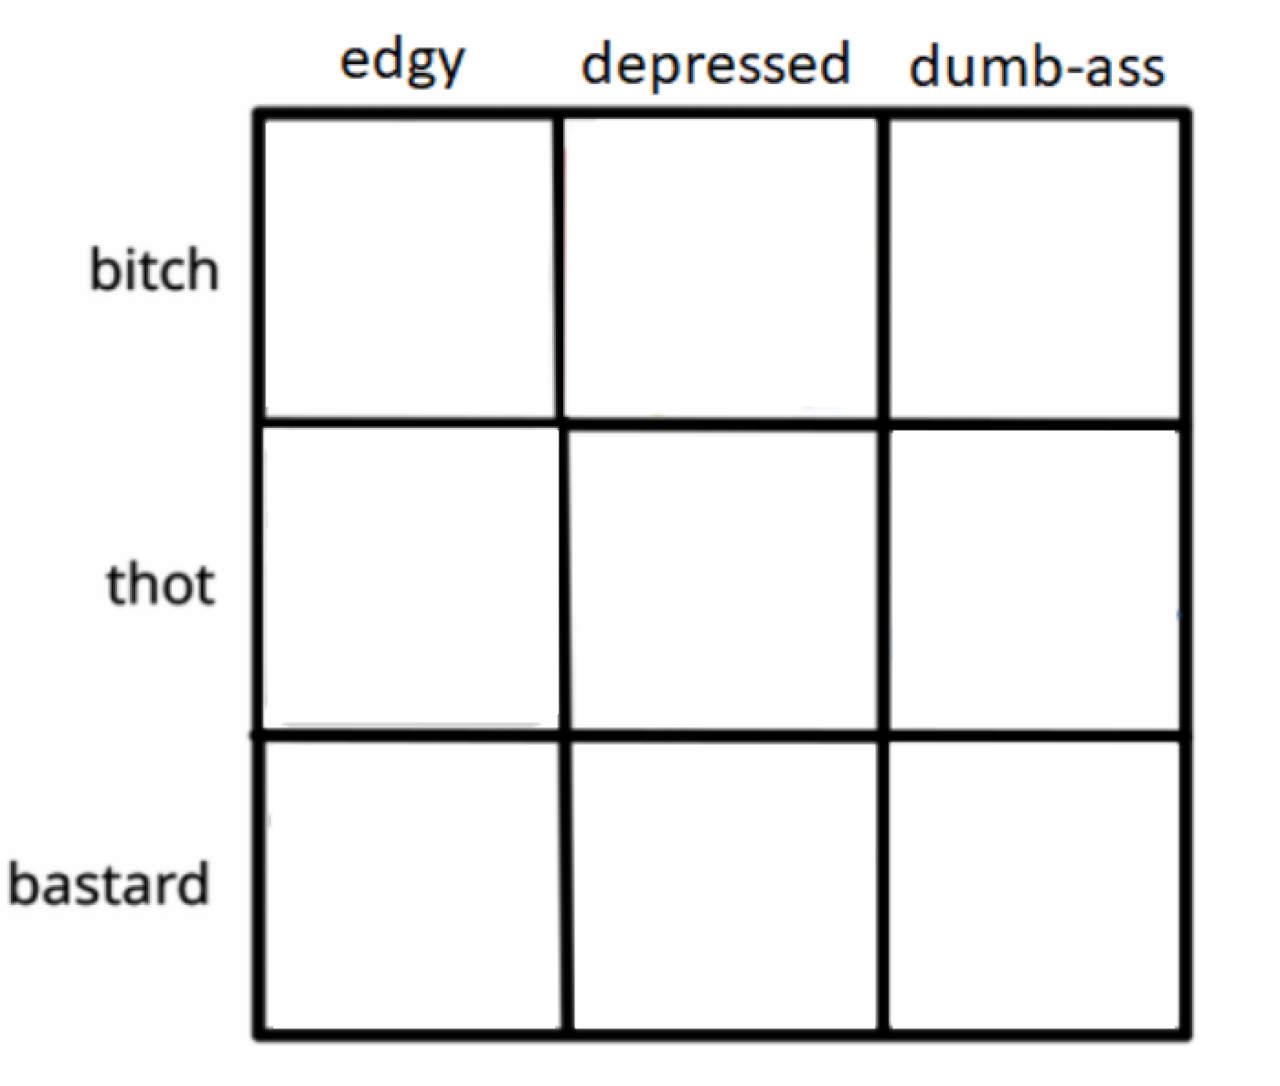 High Quality Edgy, depressed, dumbass alignment chart Blank Meme Template